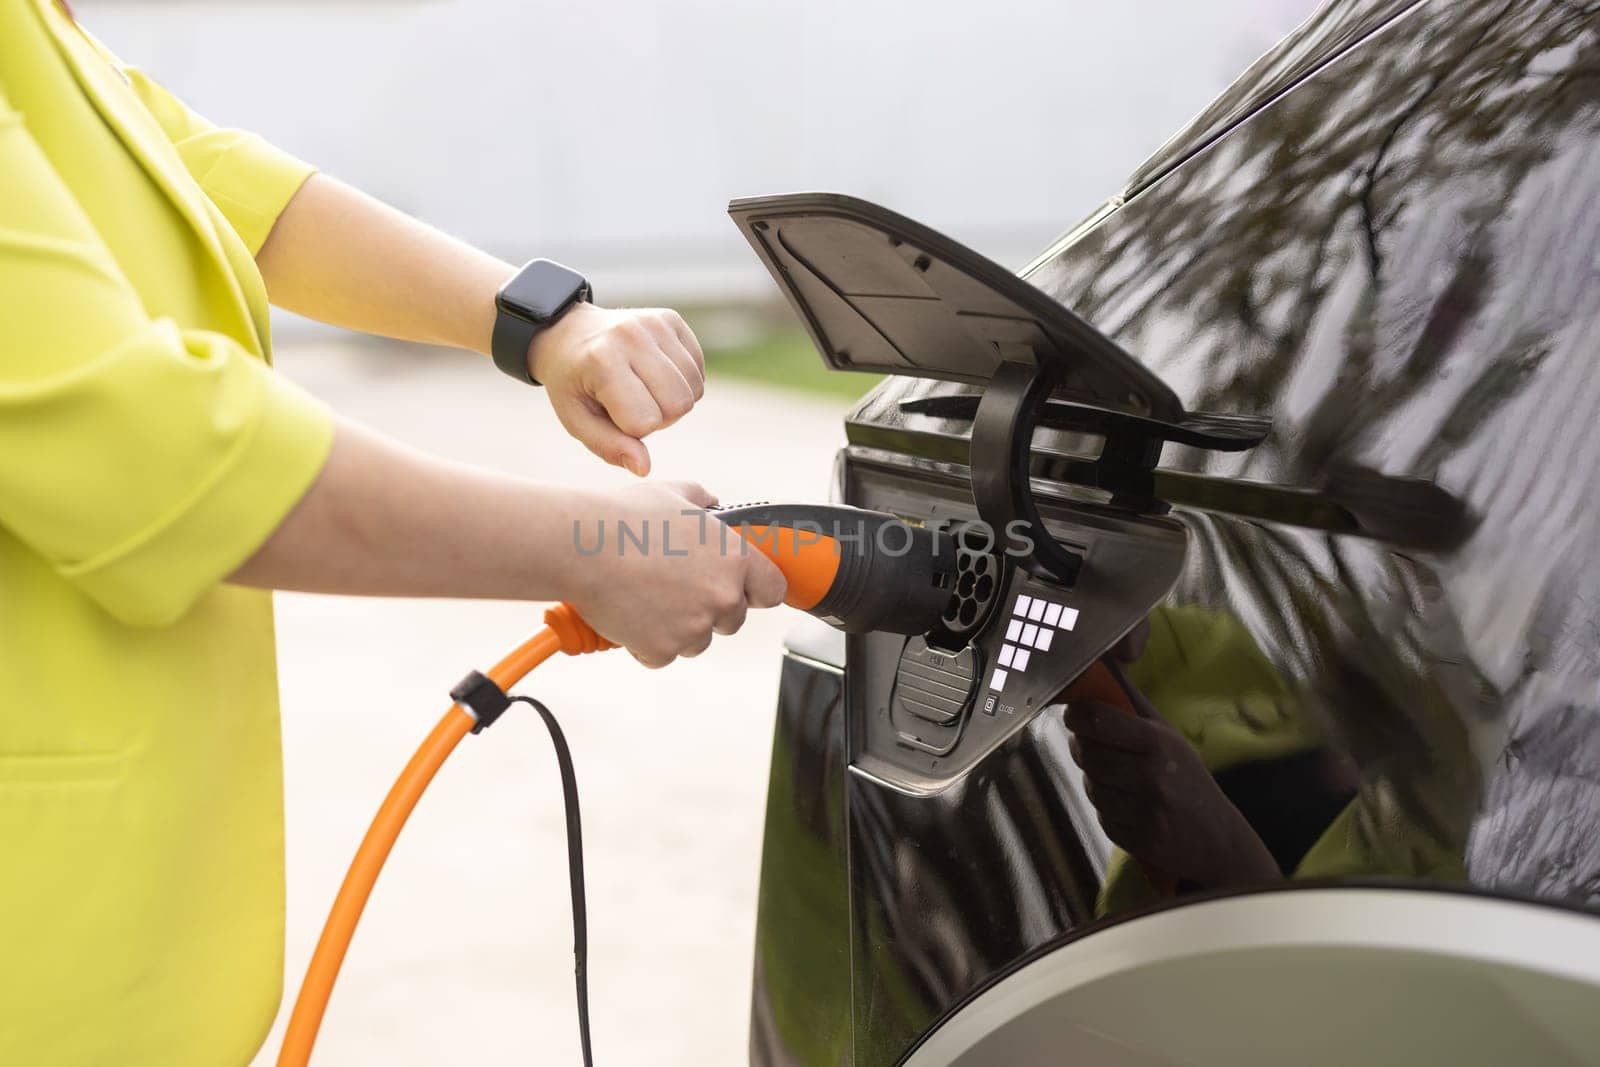 Female plugging an electric car or EV at electric charging station. Woman hands attaching power cable supply to charge electric or EV car using app on wearable smart watch.